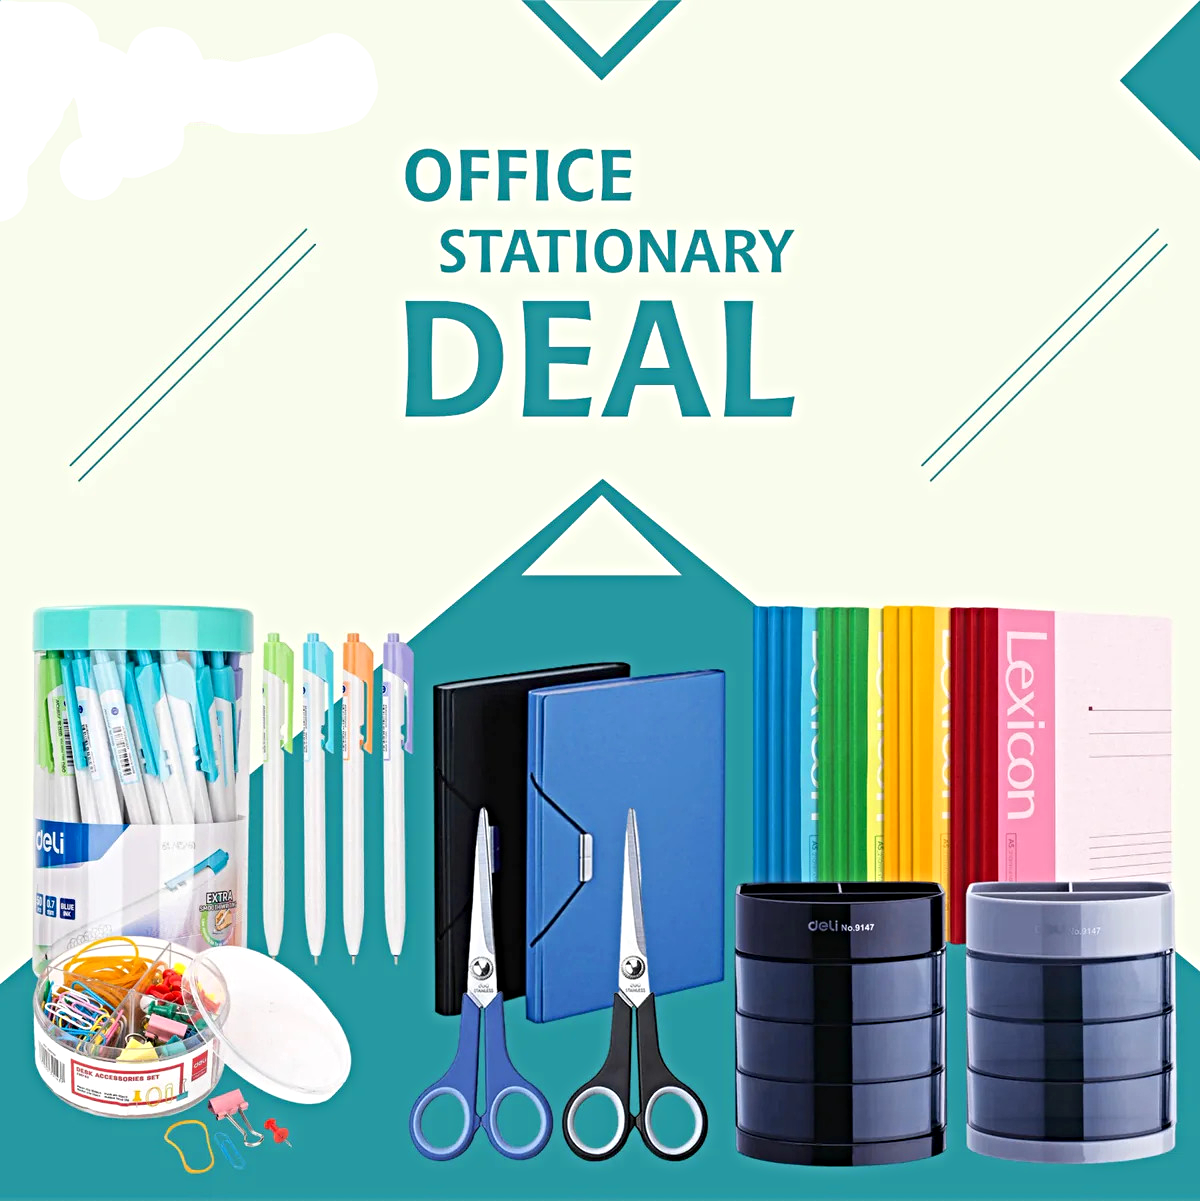 Deli Office Stationery Deal 10 Pieces Set